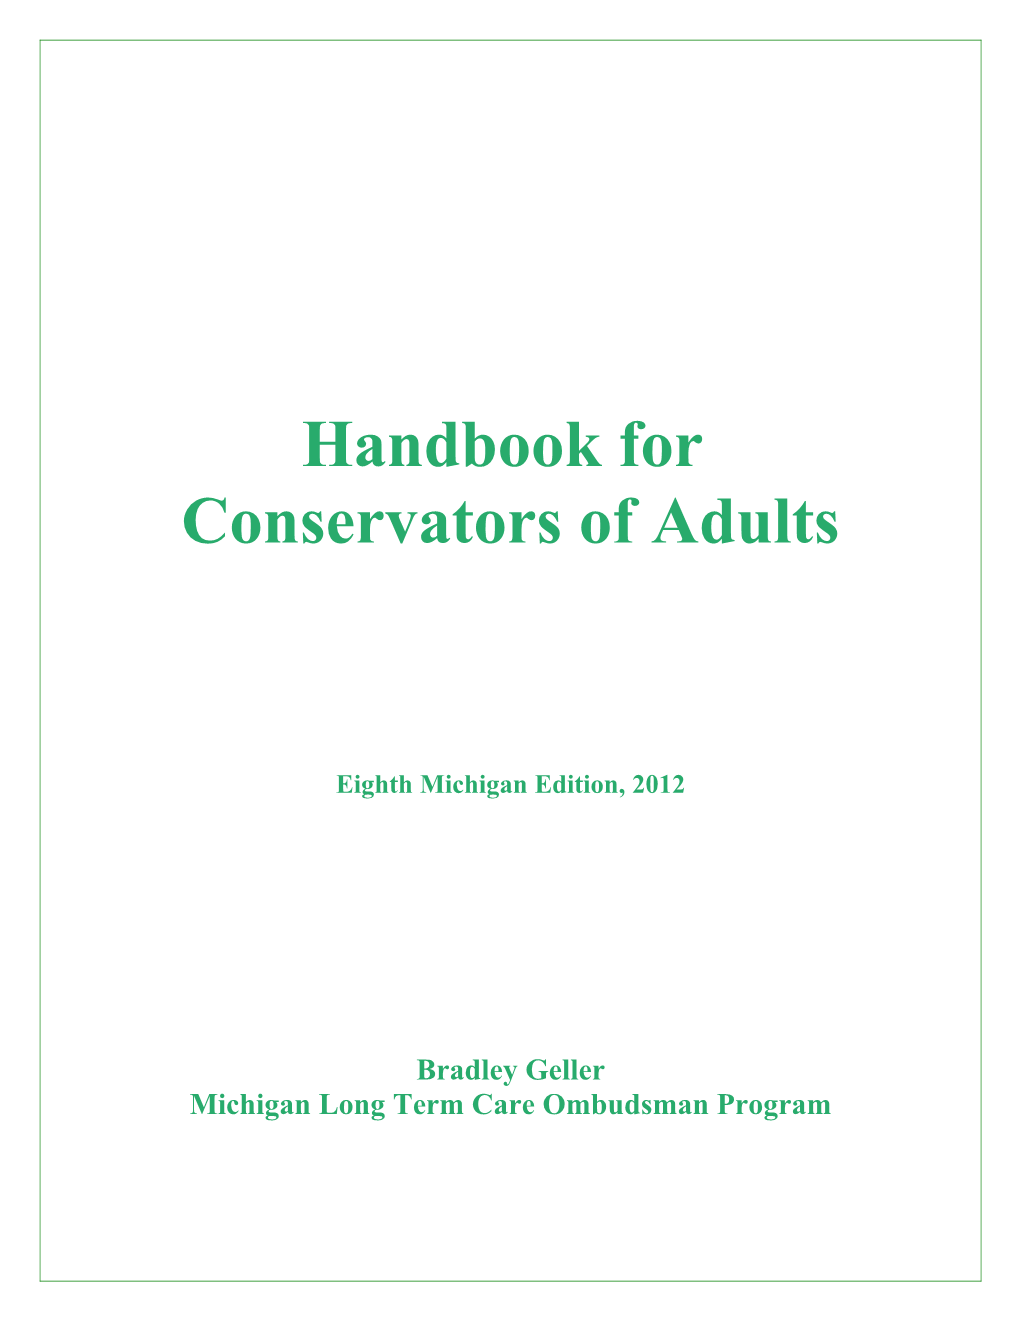 Conservators of Adults